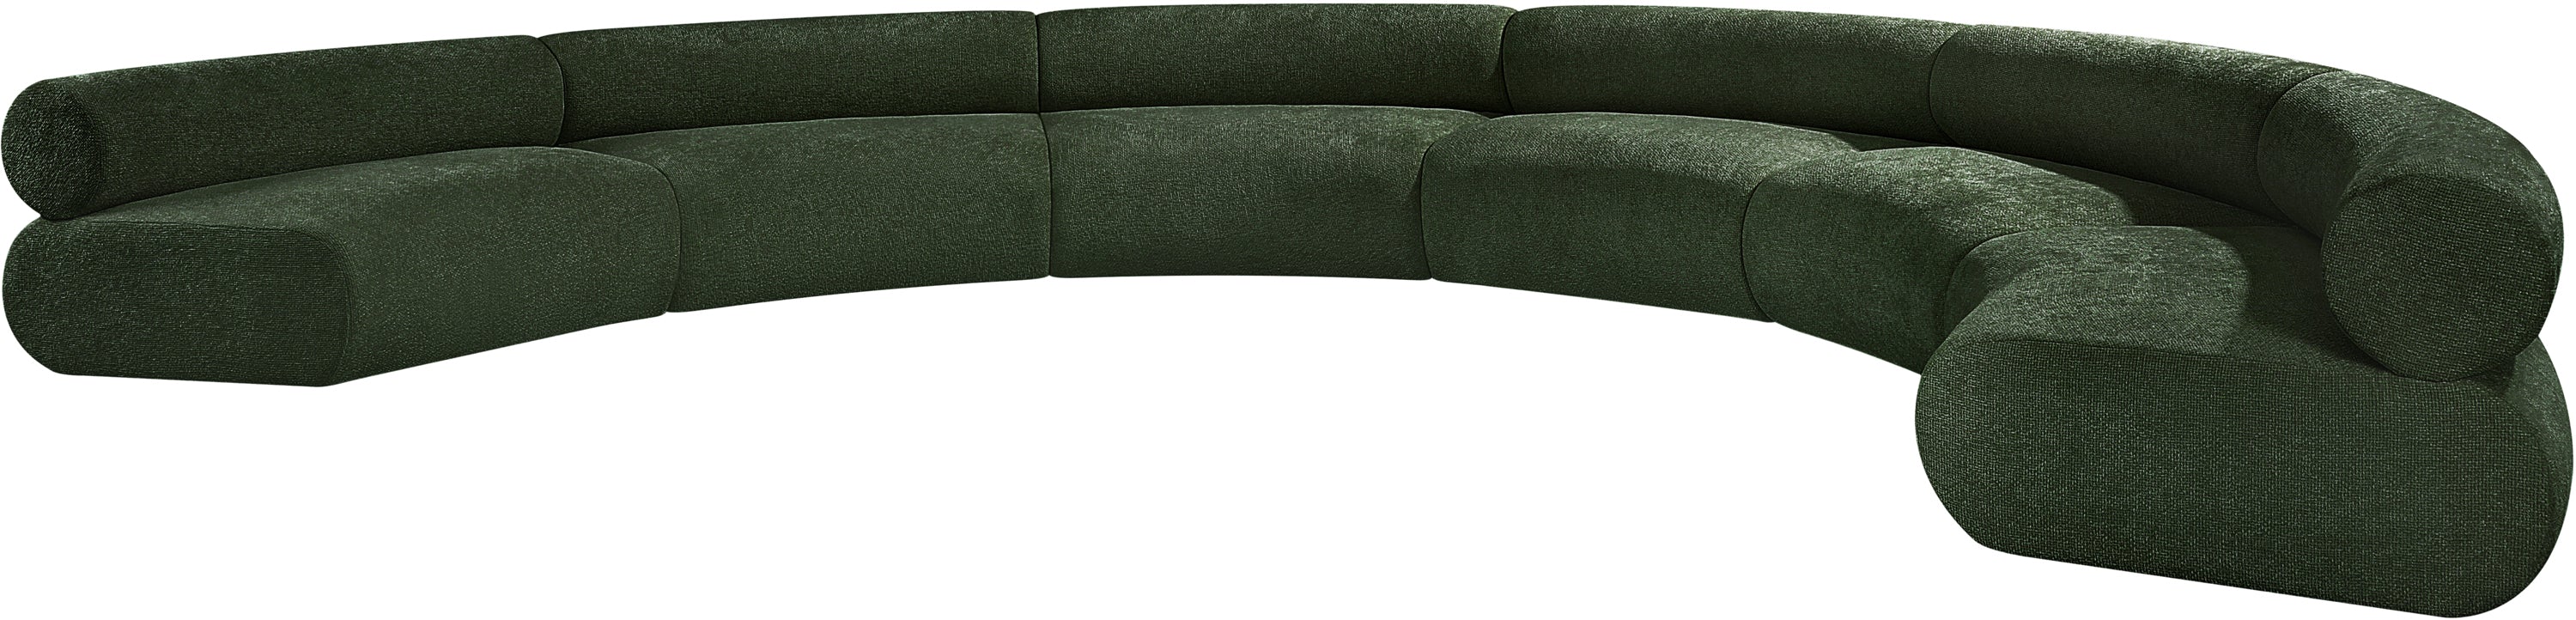 Bale Chenille Fabric 6 pc. Sectional